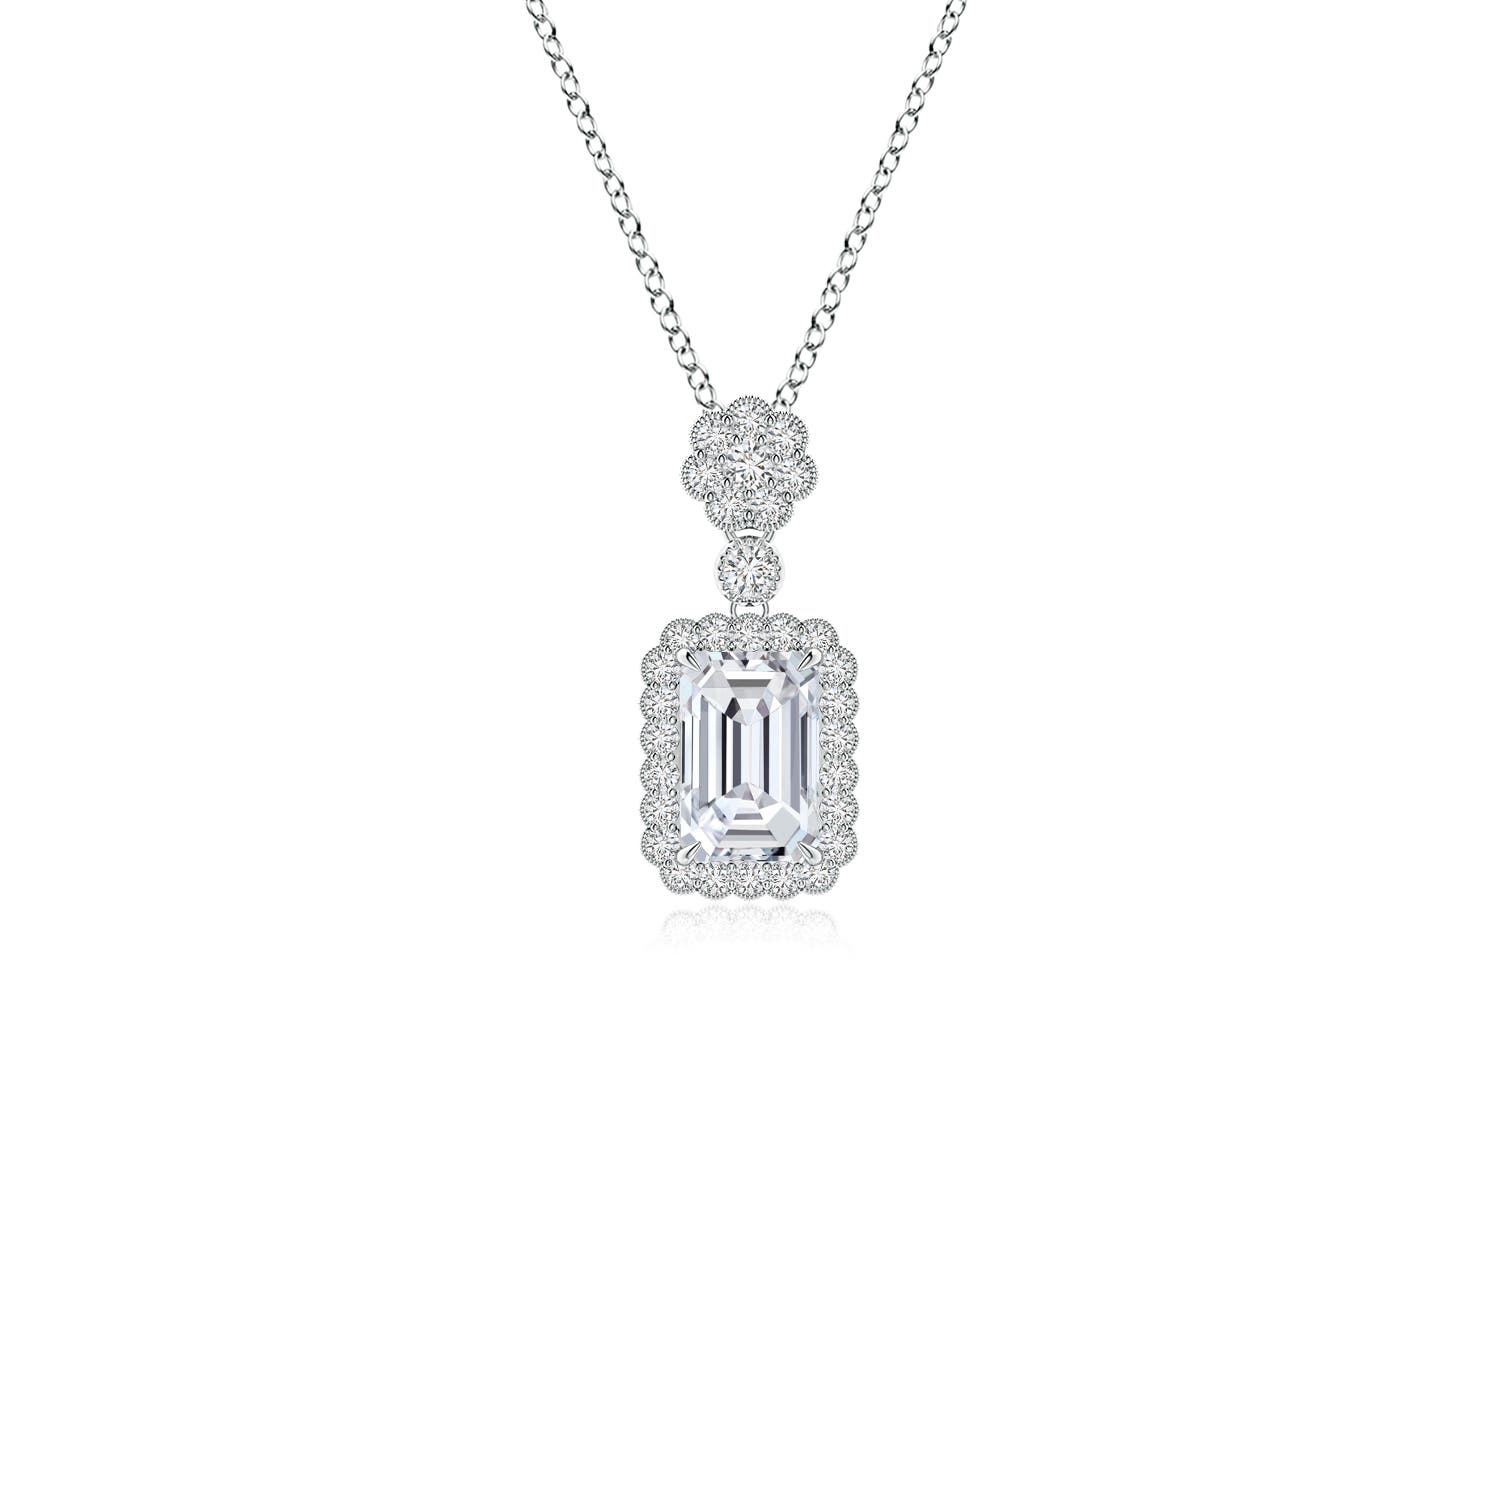 H, SI2 / 0.78 CT / 14 KT White Gold